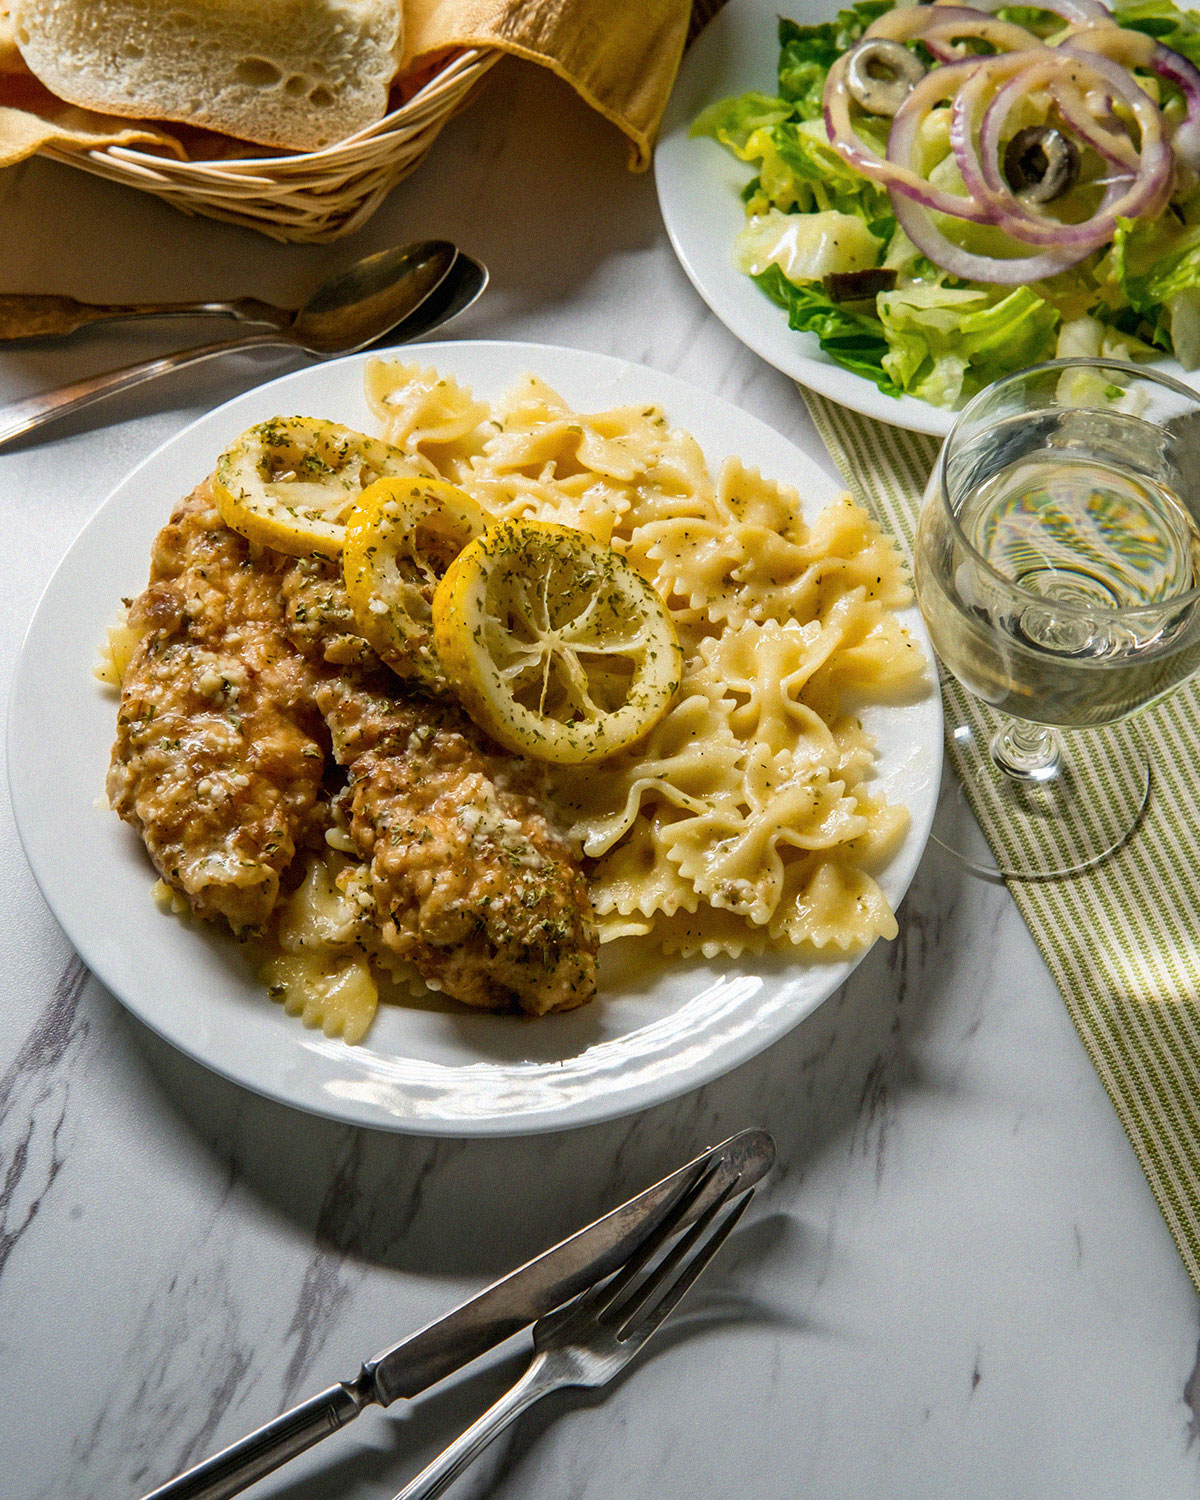 chicken francese with salad on dinner table